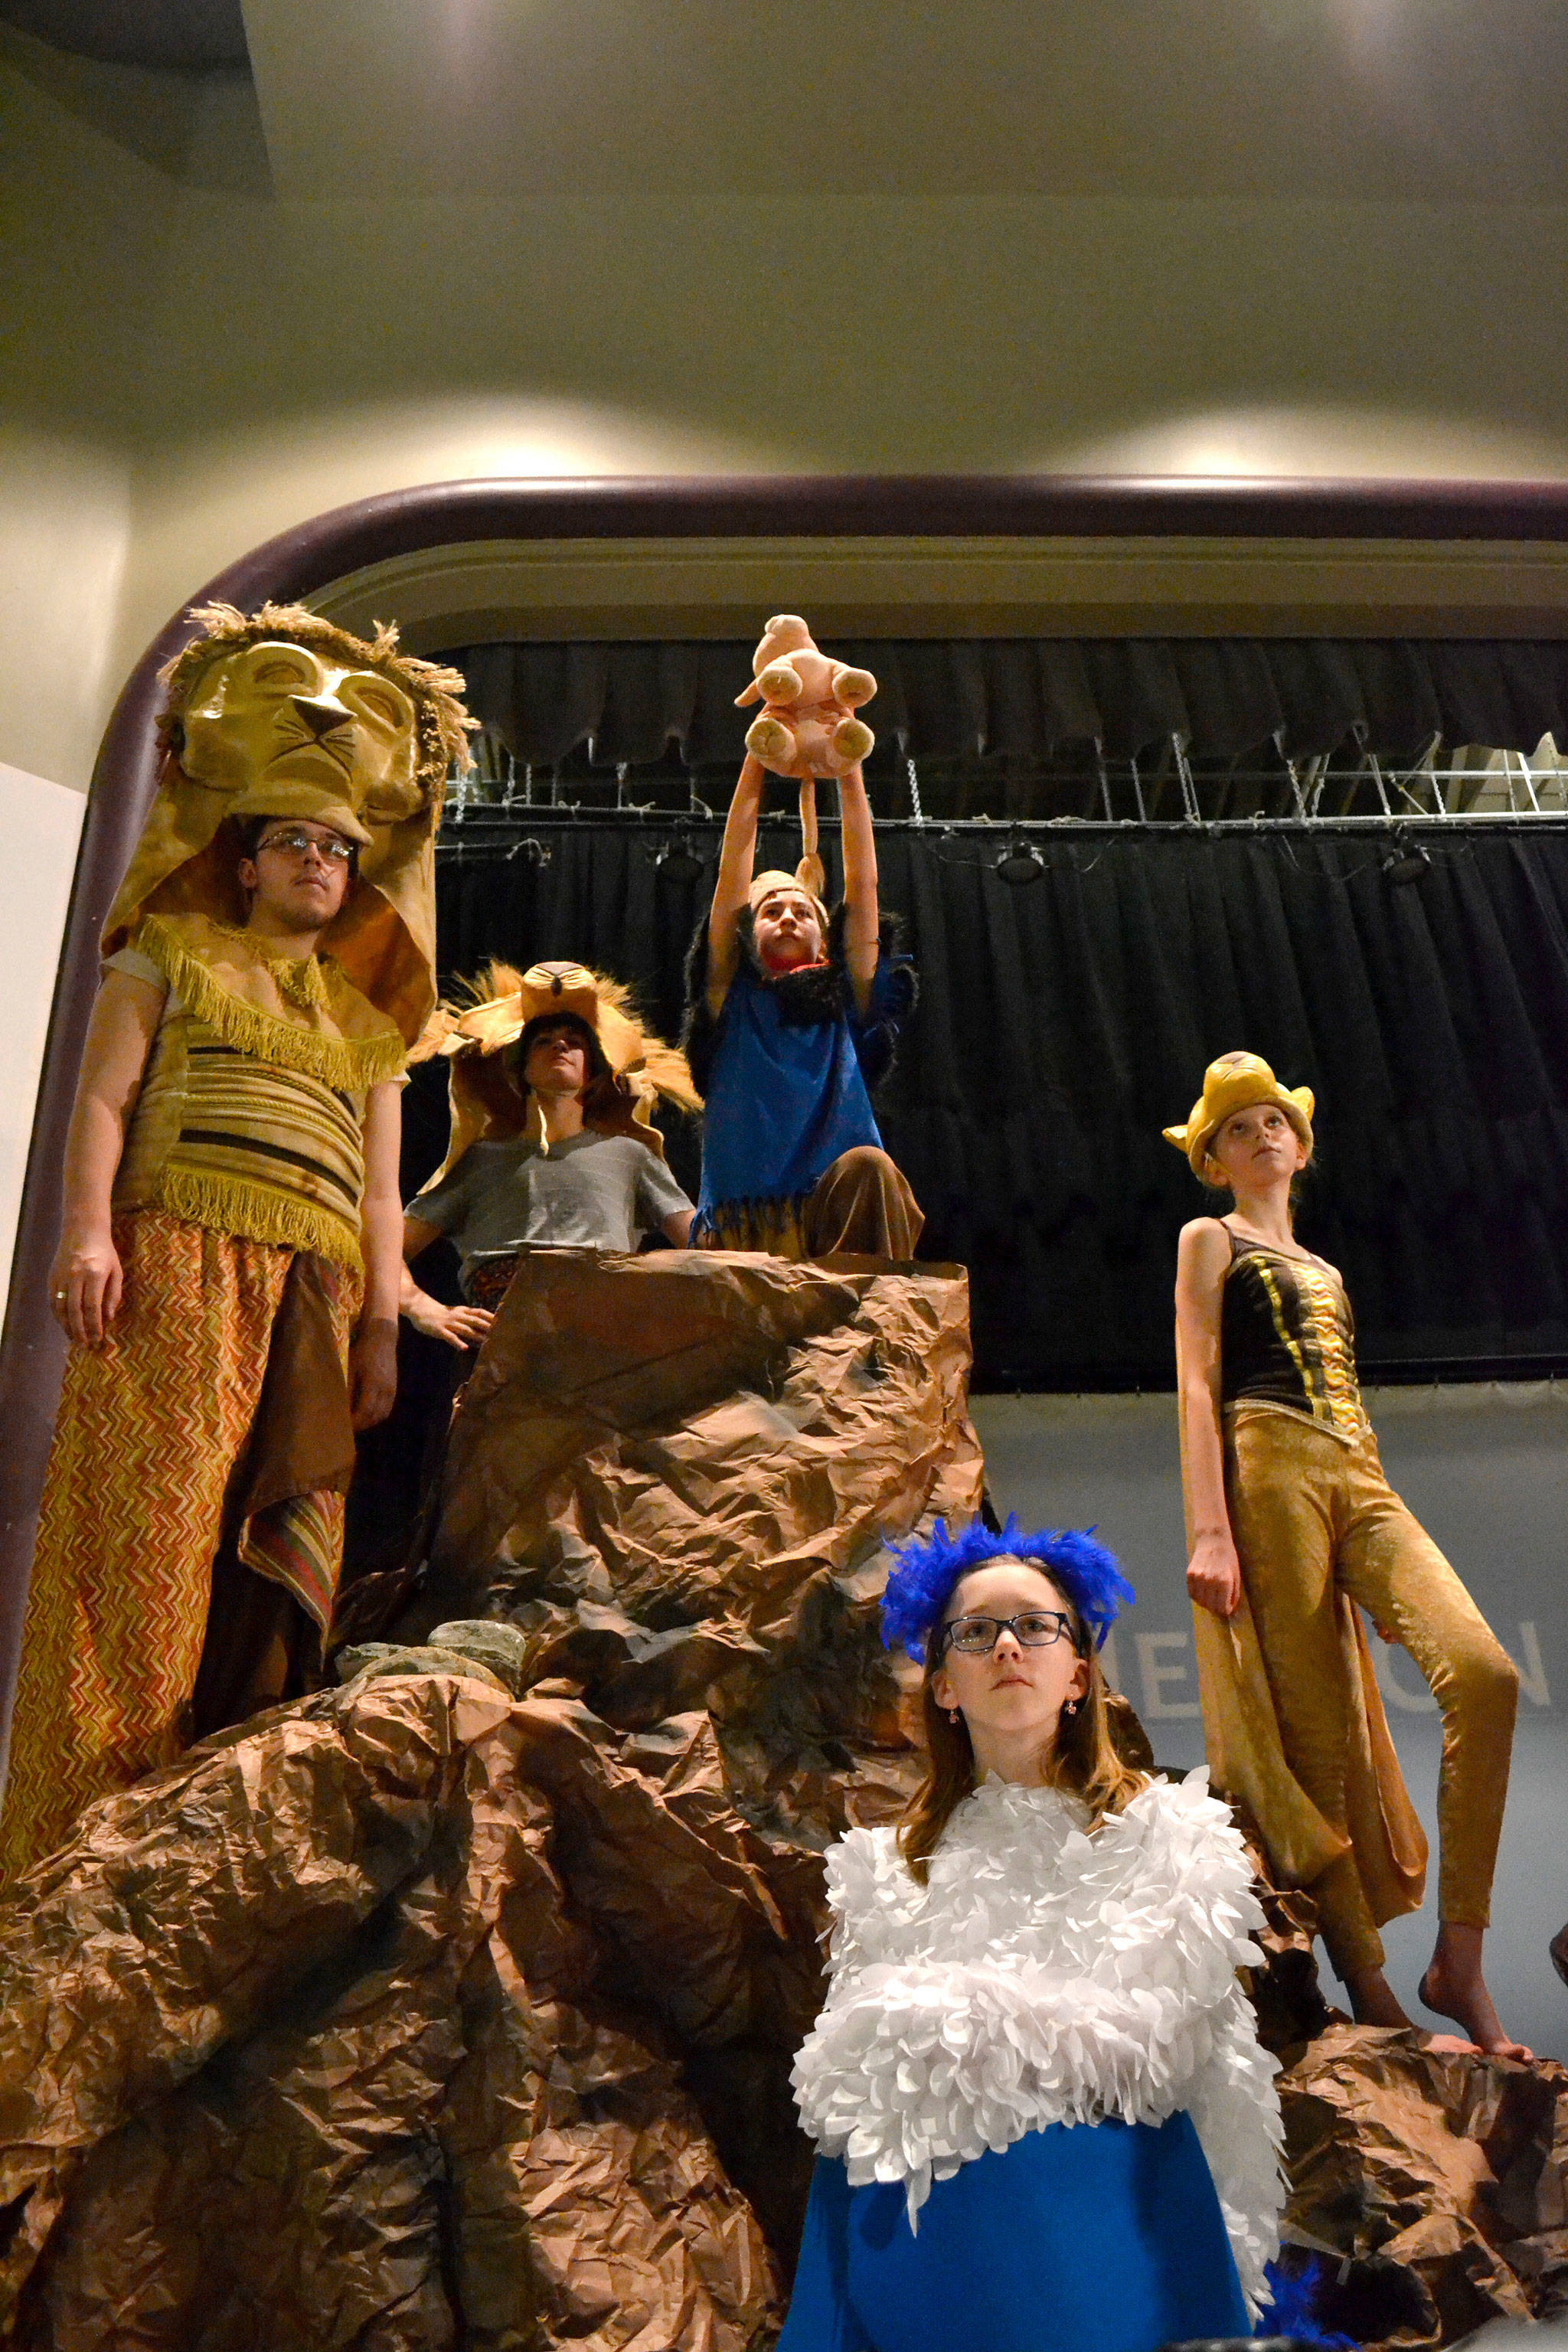 Sequim Middle School presents “The Lion King, Junior” on March 16-17 in Sequim High School Auditorium. Some of its stars include, from left, Damien Cundiff, Henry Hughes, Kariya Johnson, Julia Jeffers, and Kendall Hastings. Sequim Gazette photo by Matthew Nash